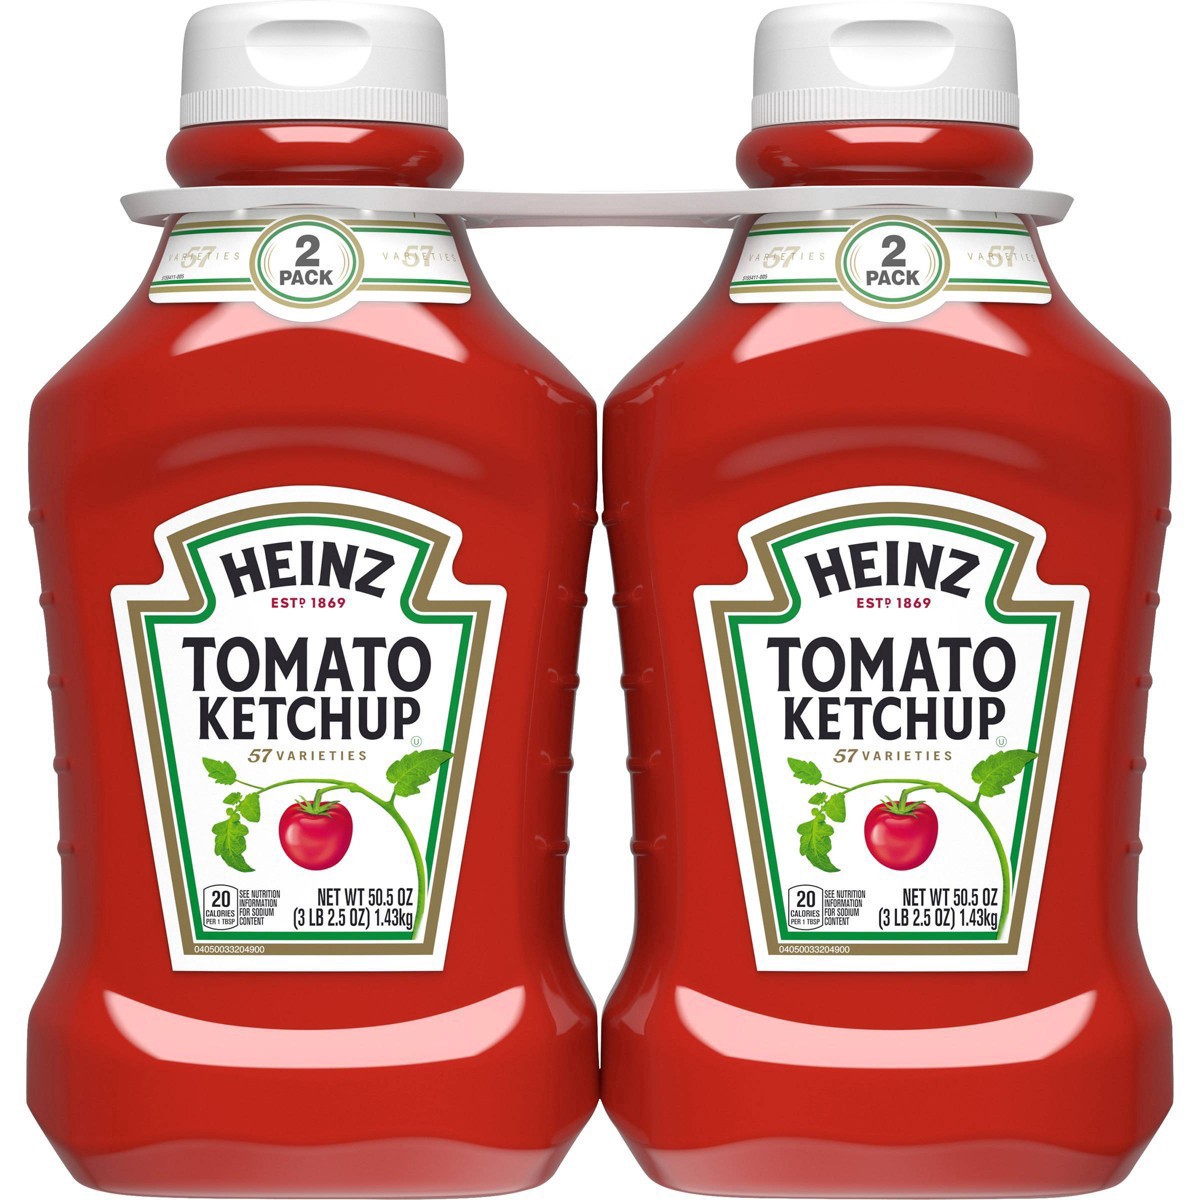 slide 24 of 127, Heinz Tomato Ketchup Pack, 2 ct; 50.5 oz